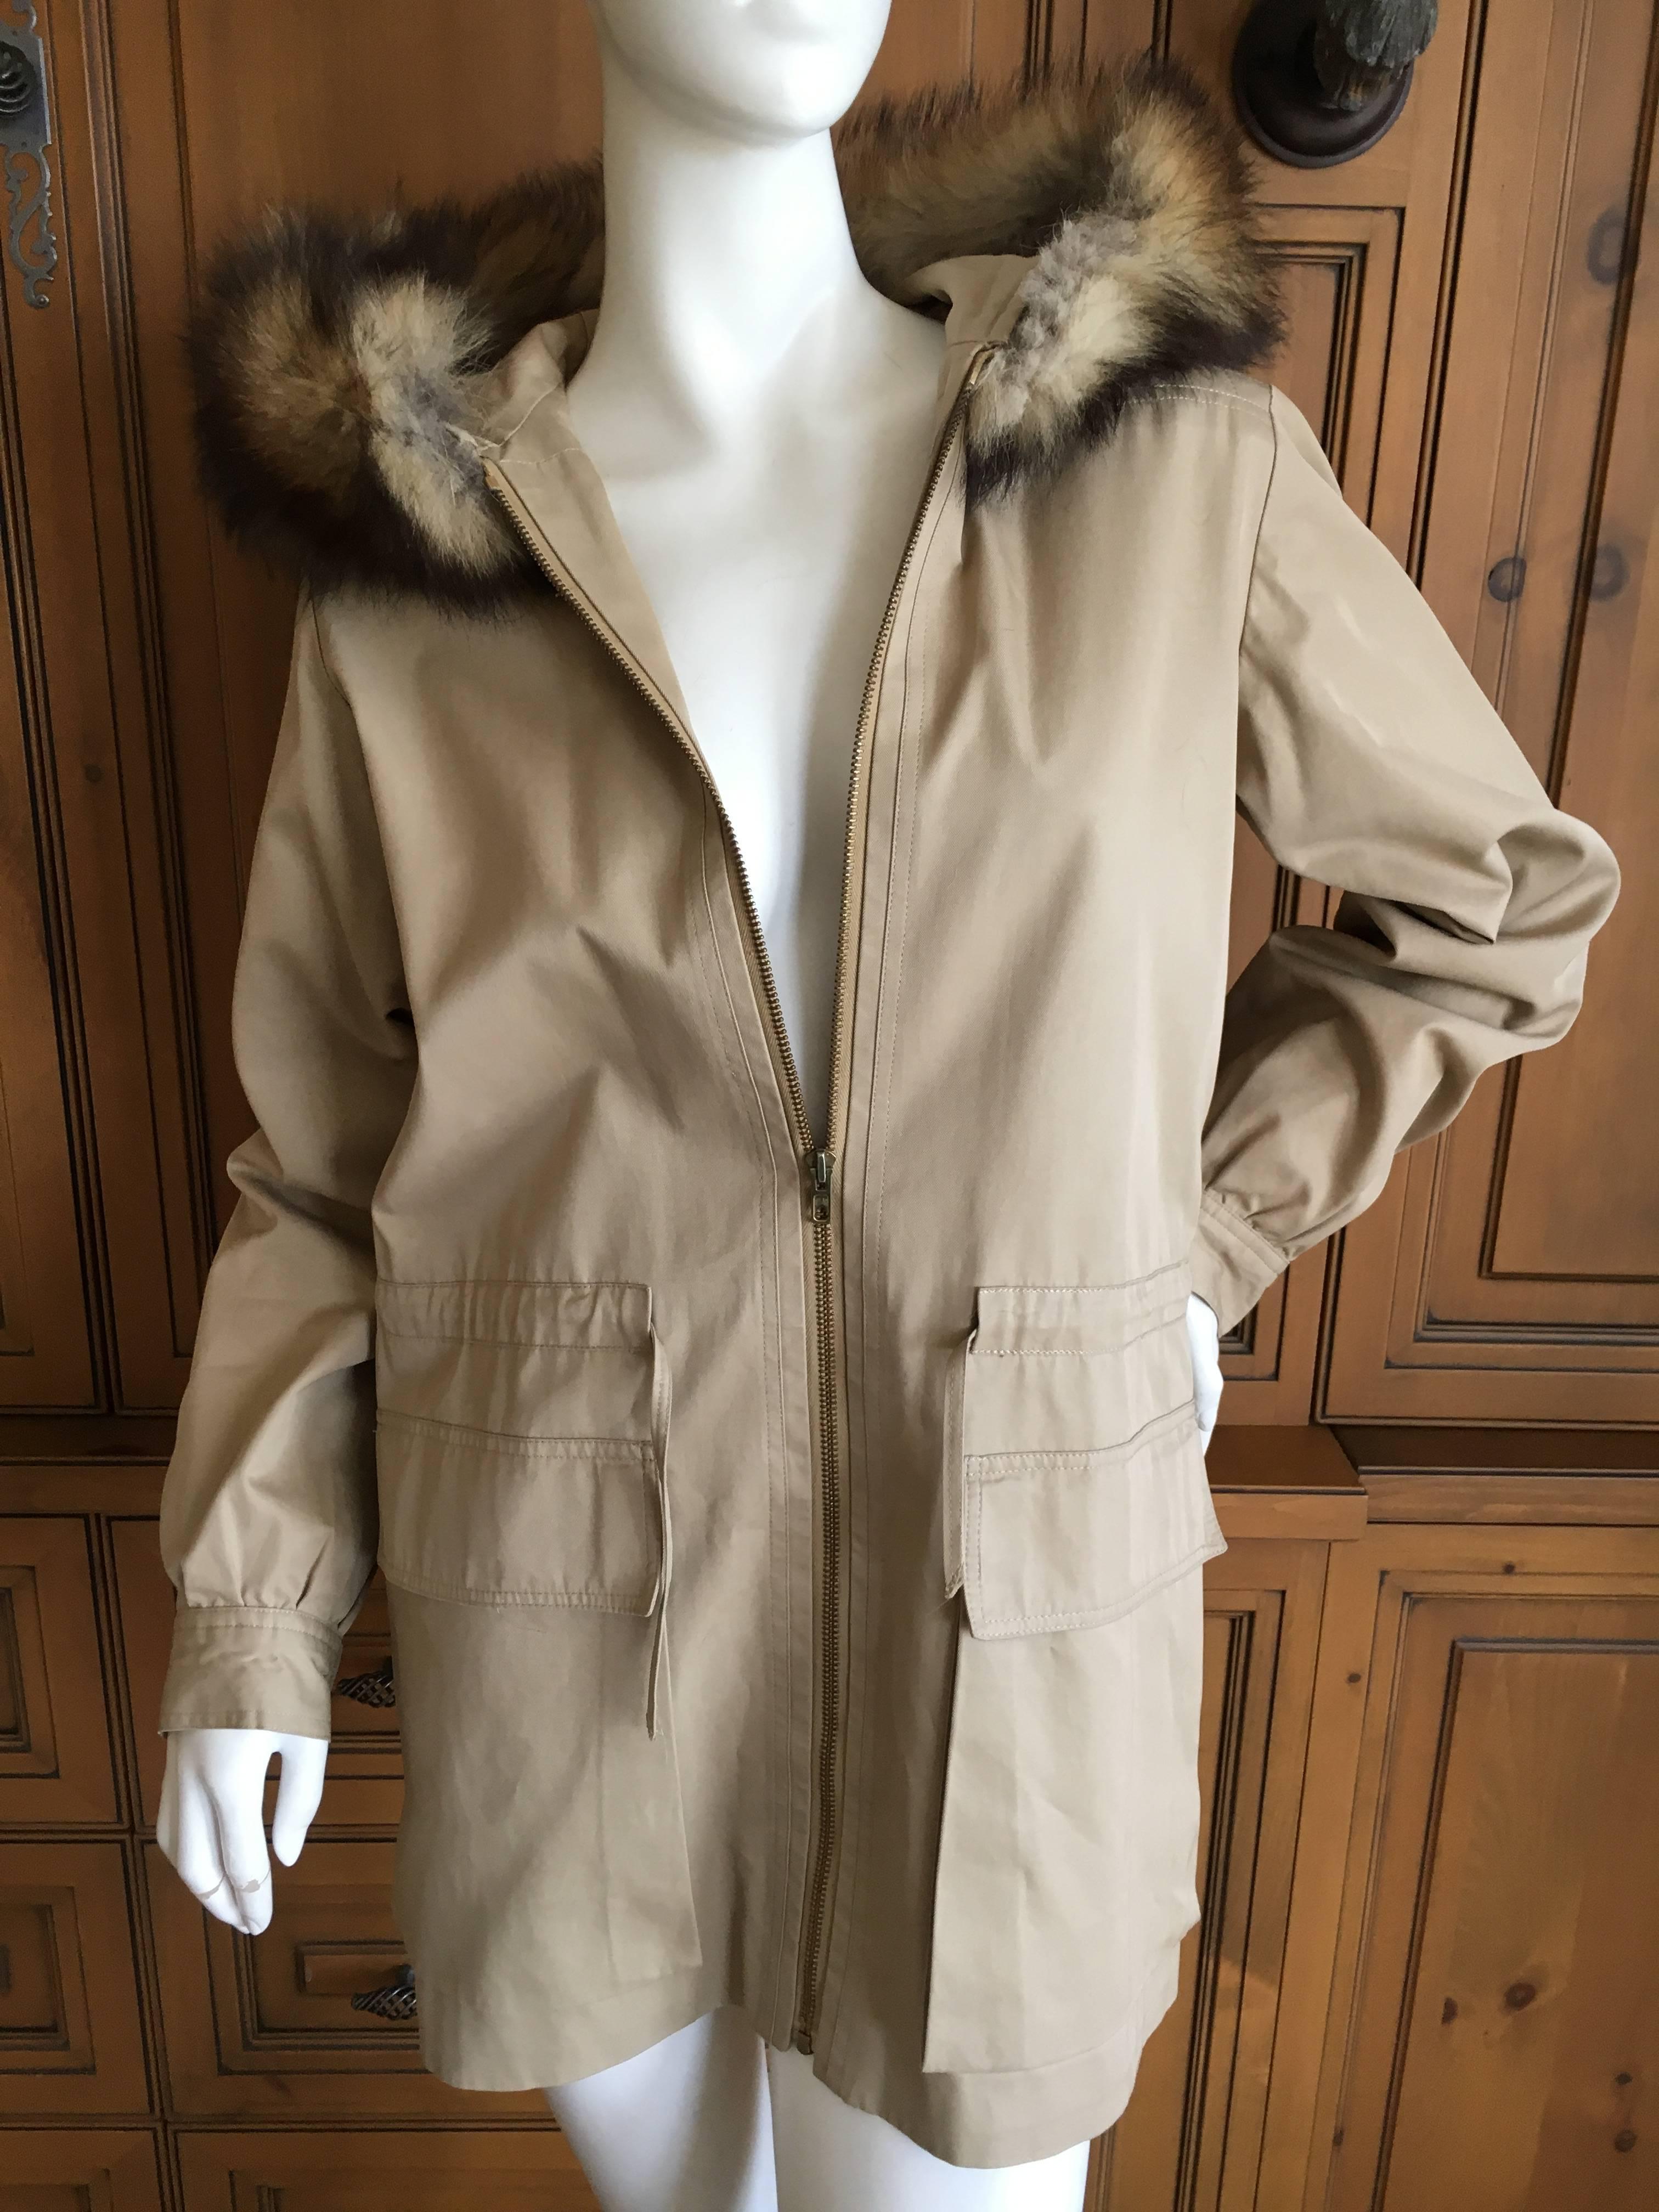 Saint Laurent Rive Gauche 1970's Tan Jacket with Furl Trim Hood.
A classic from around 1977, the label reads 